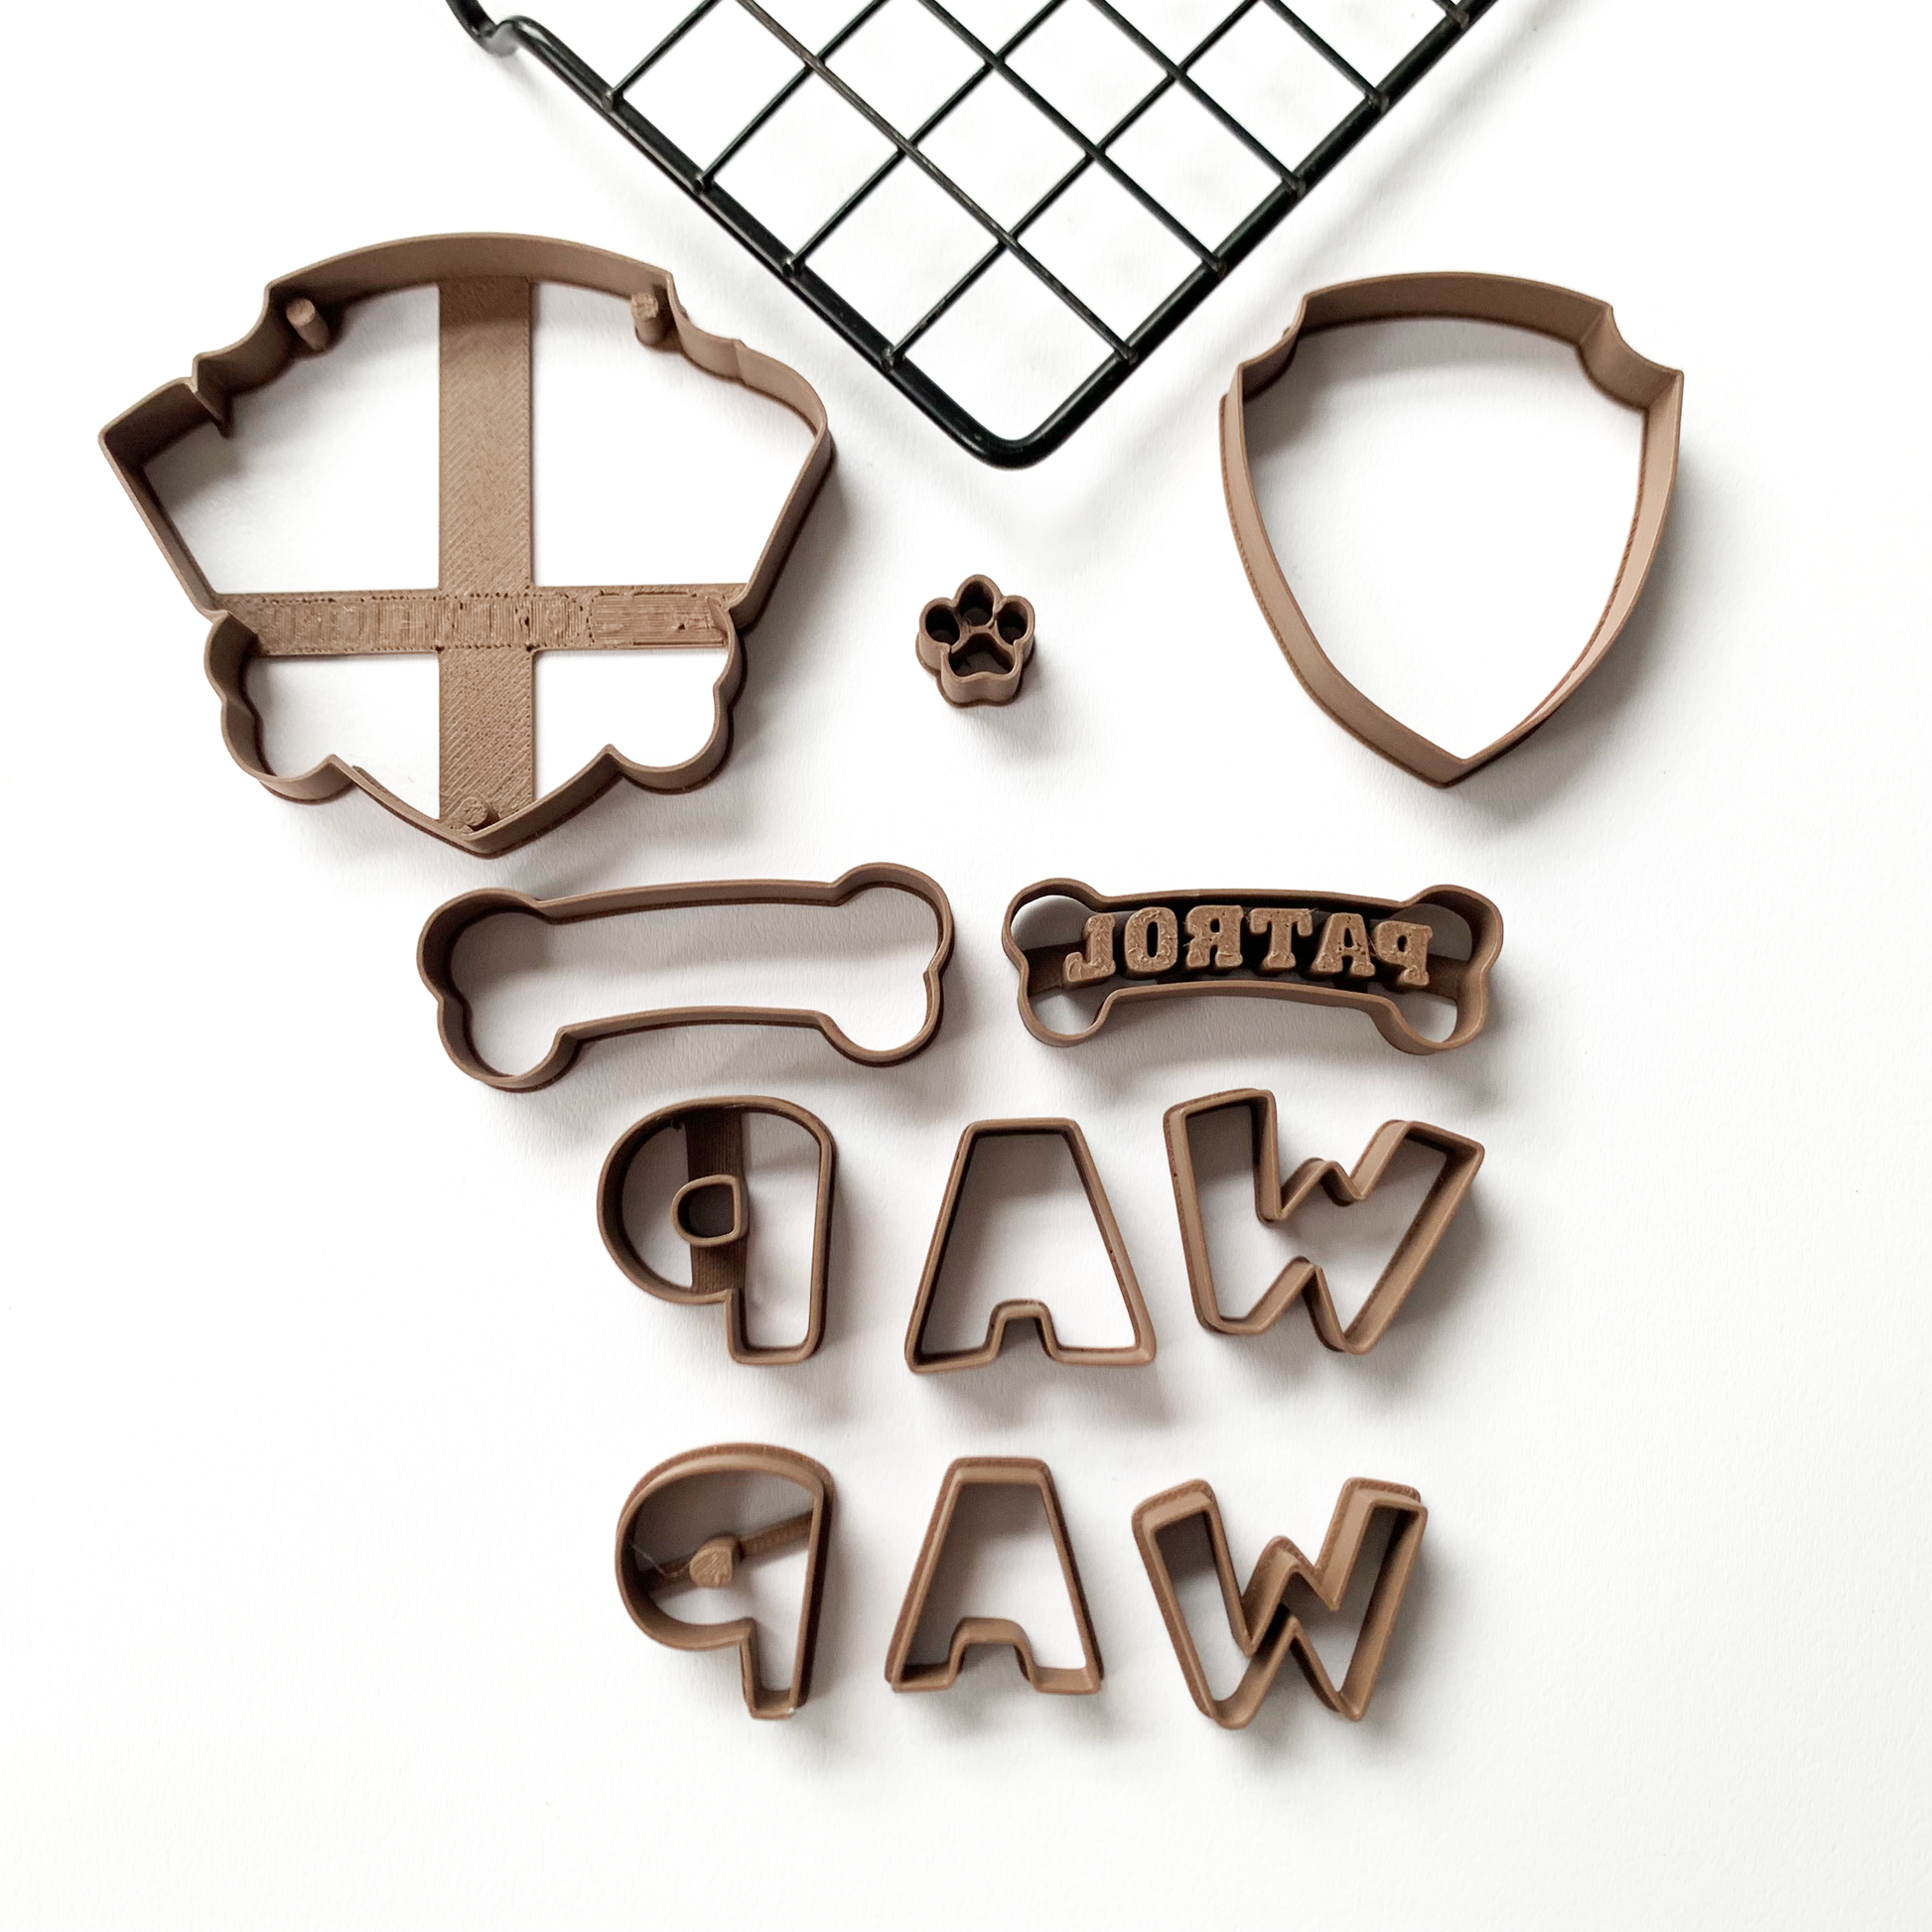 Paw Patrol Logo and PawPrint Cookie Cutter Cake Decor Small Medium Large MEG cookie cutters